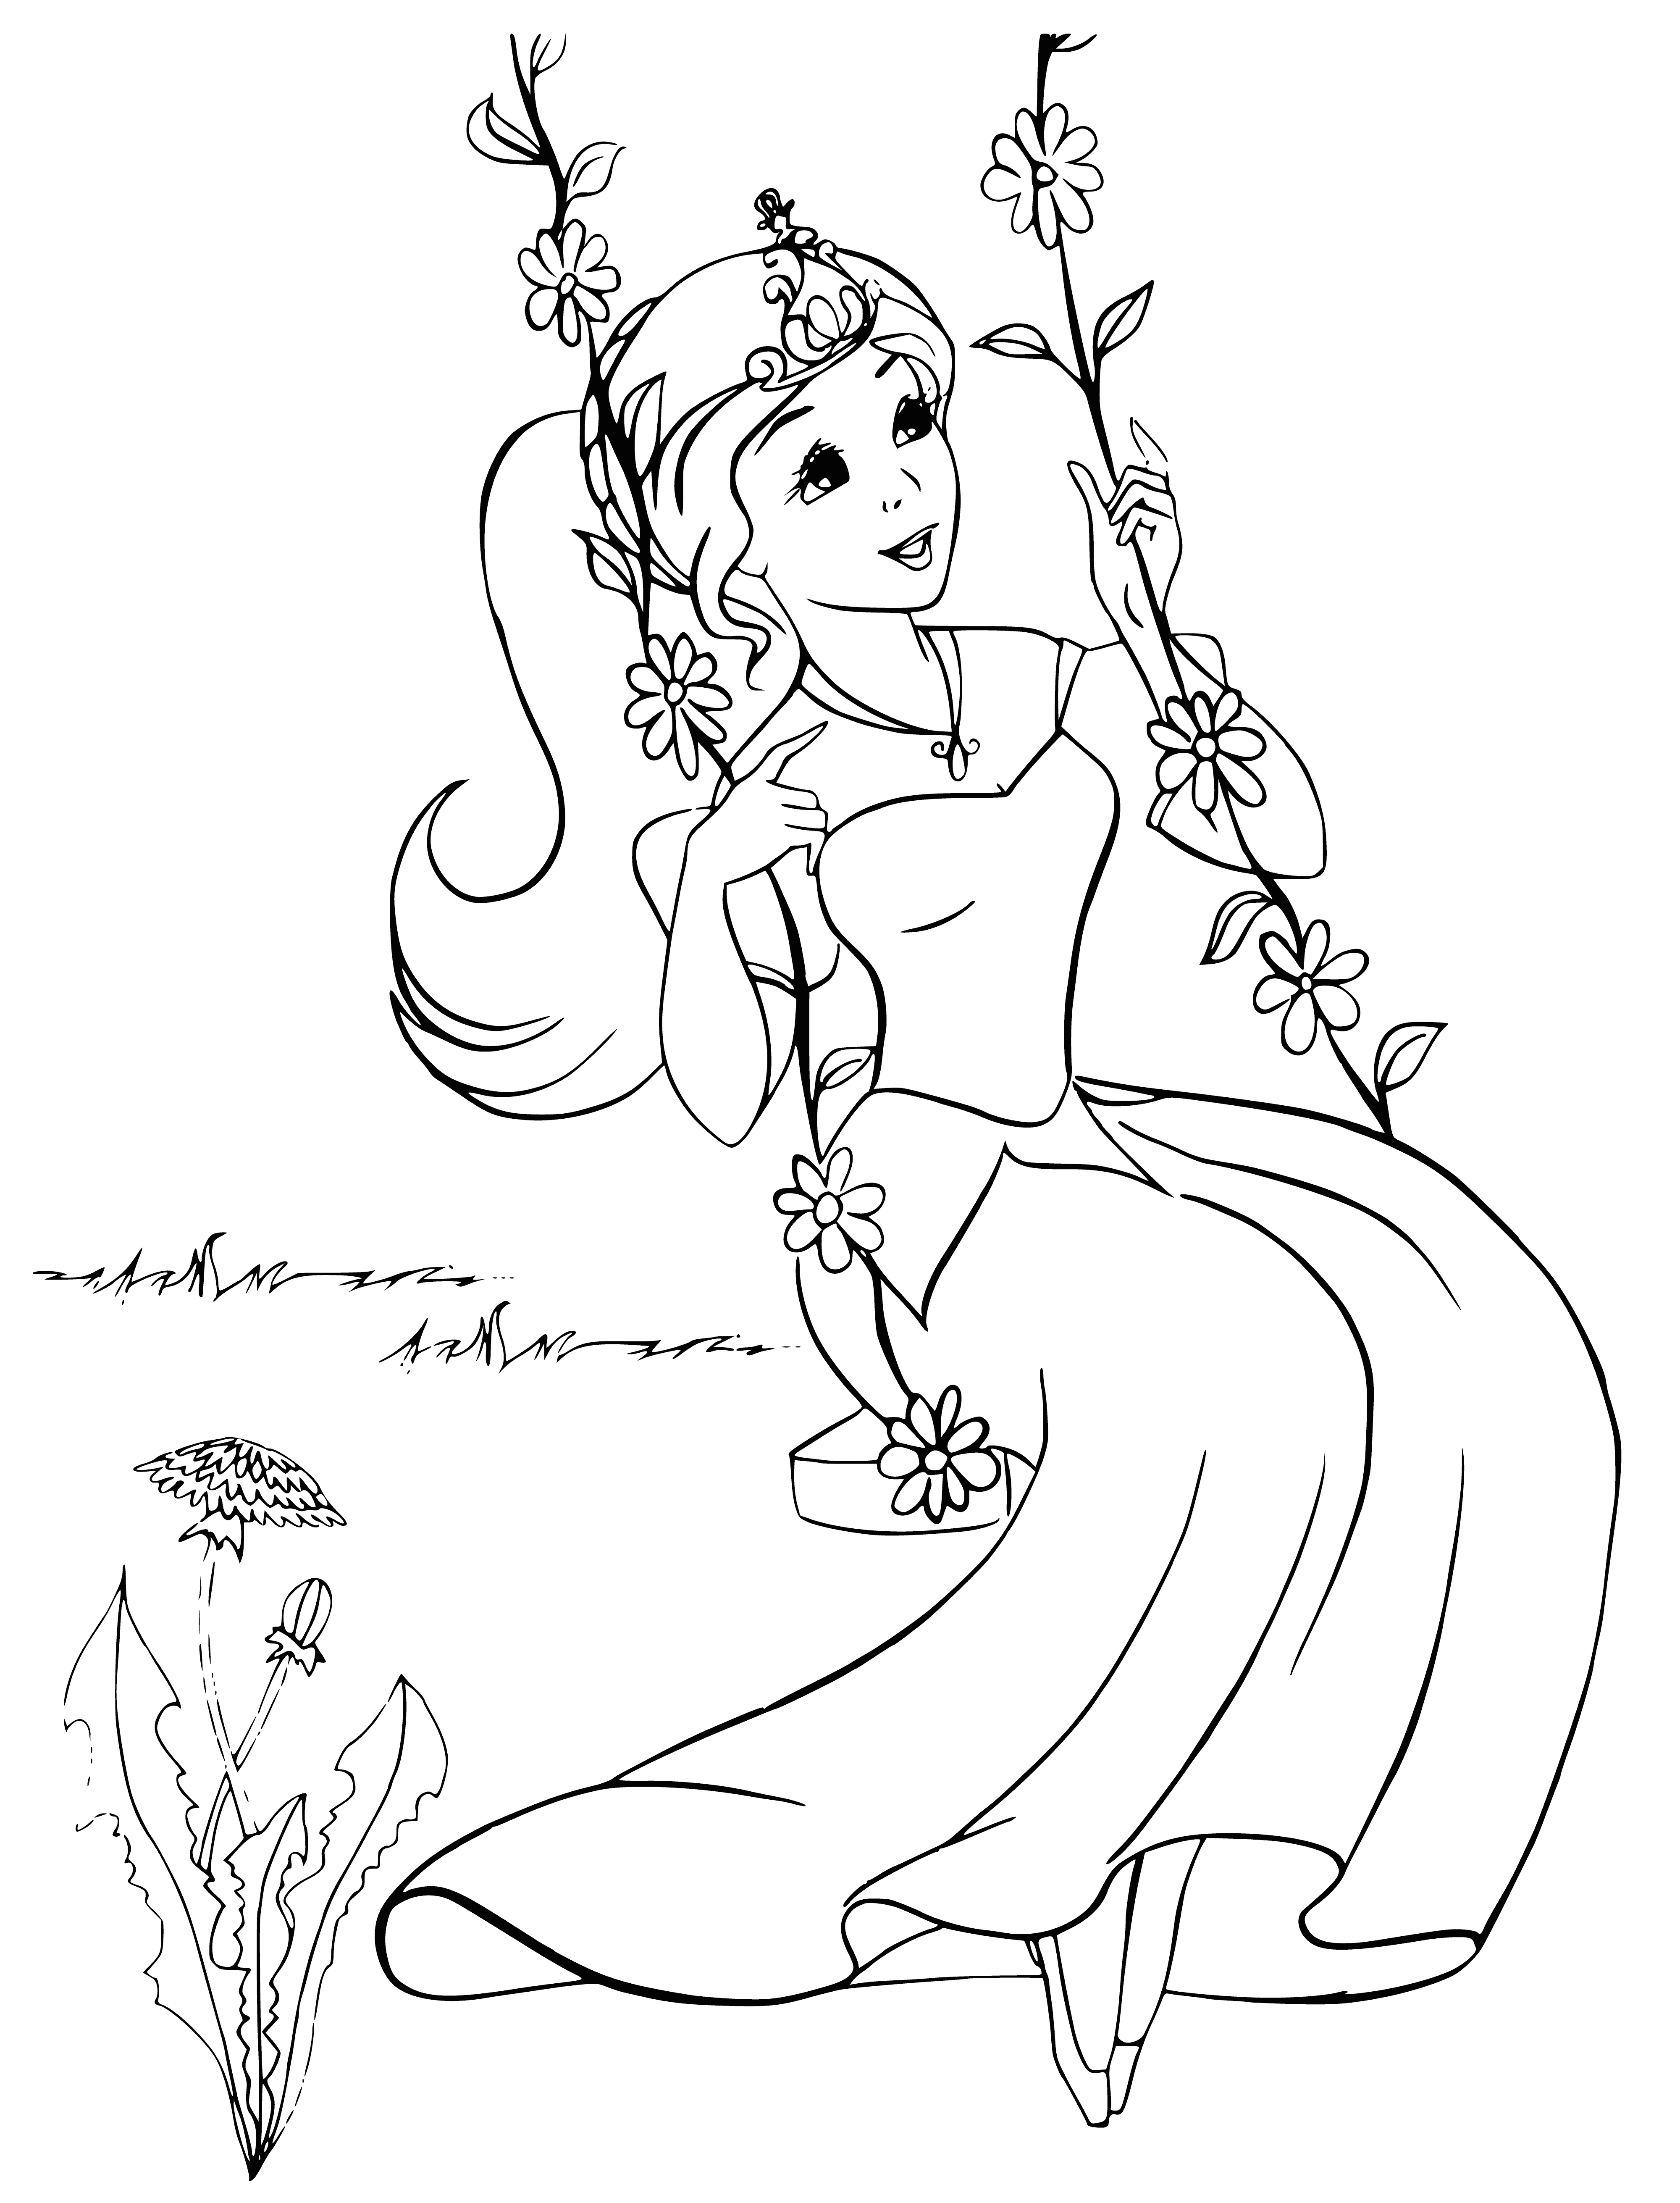 Princess on a swing coloring page